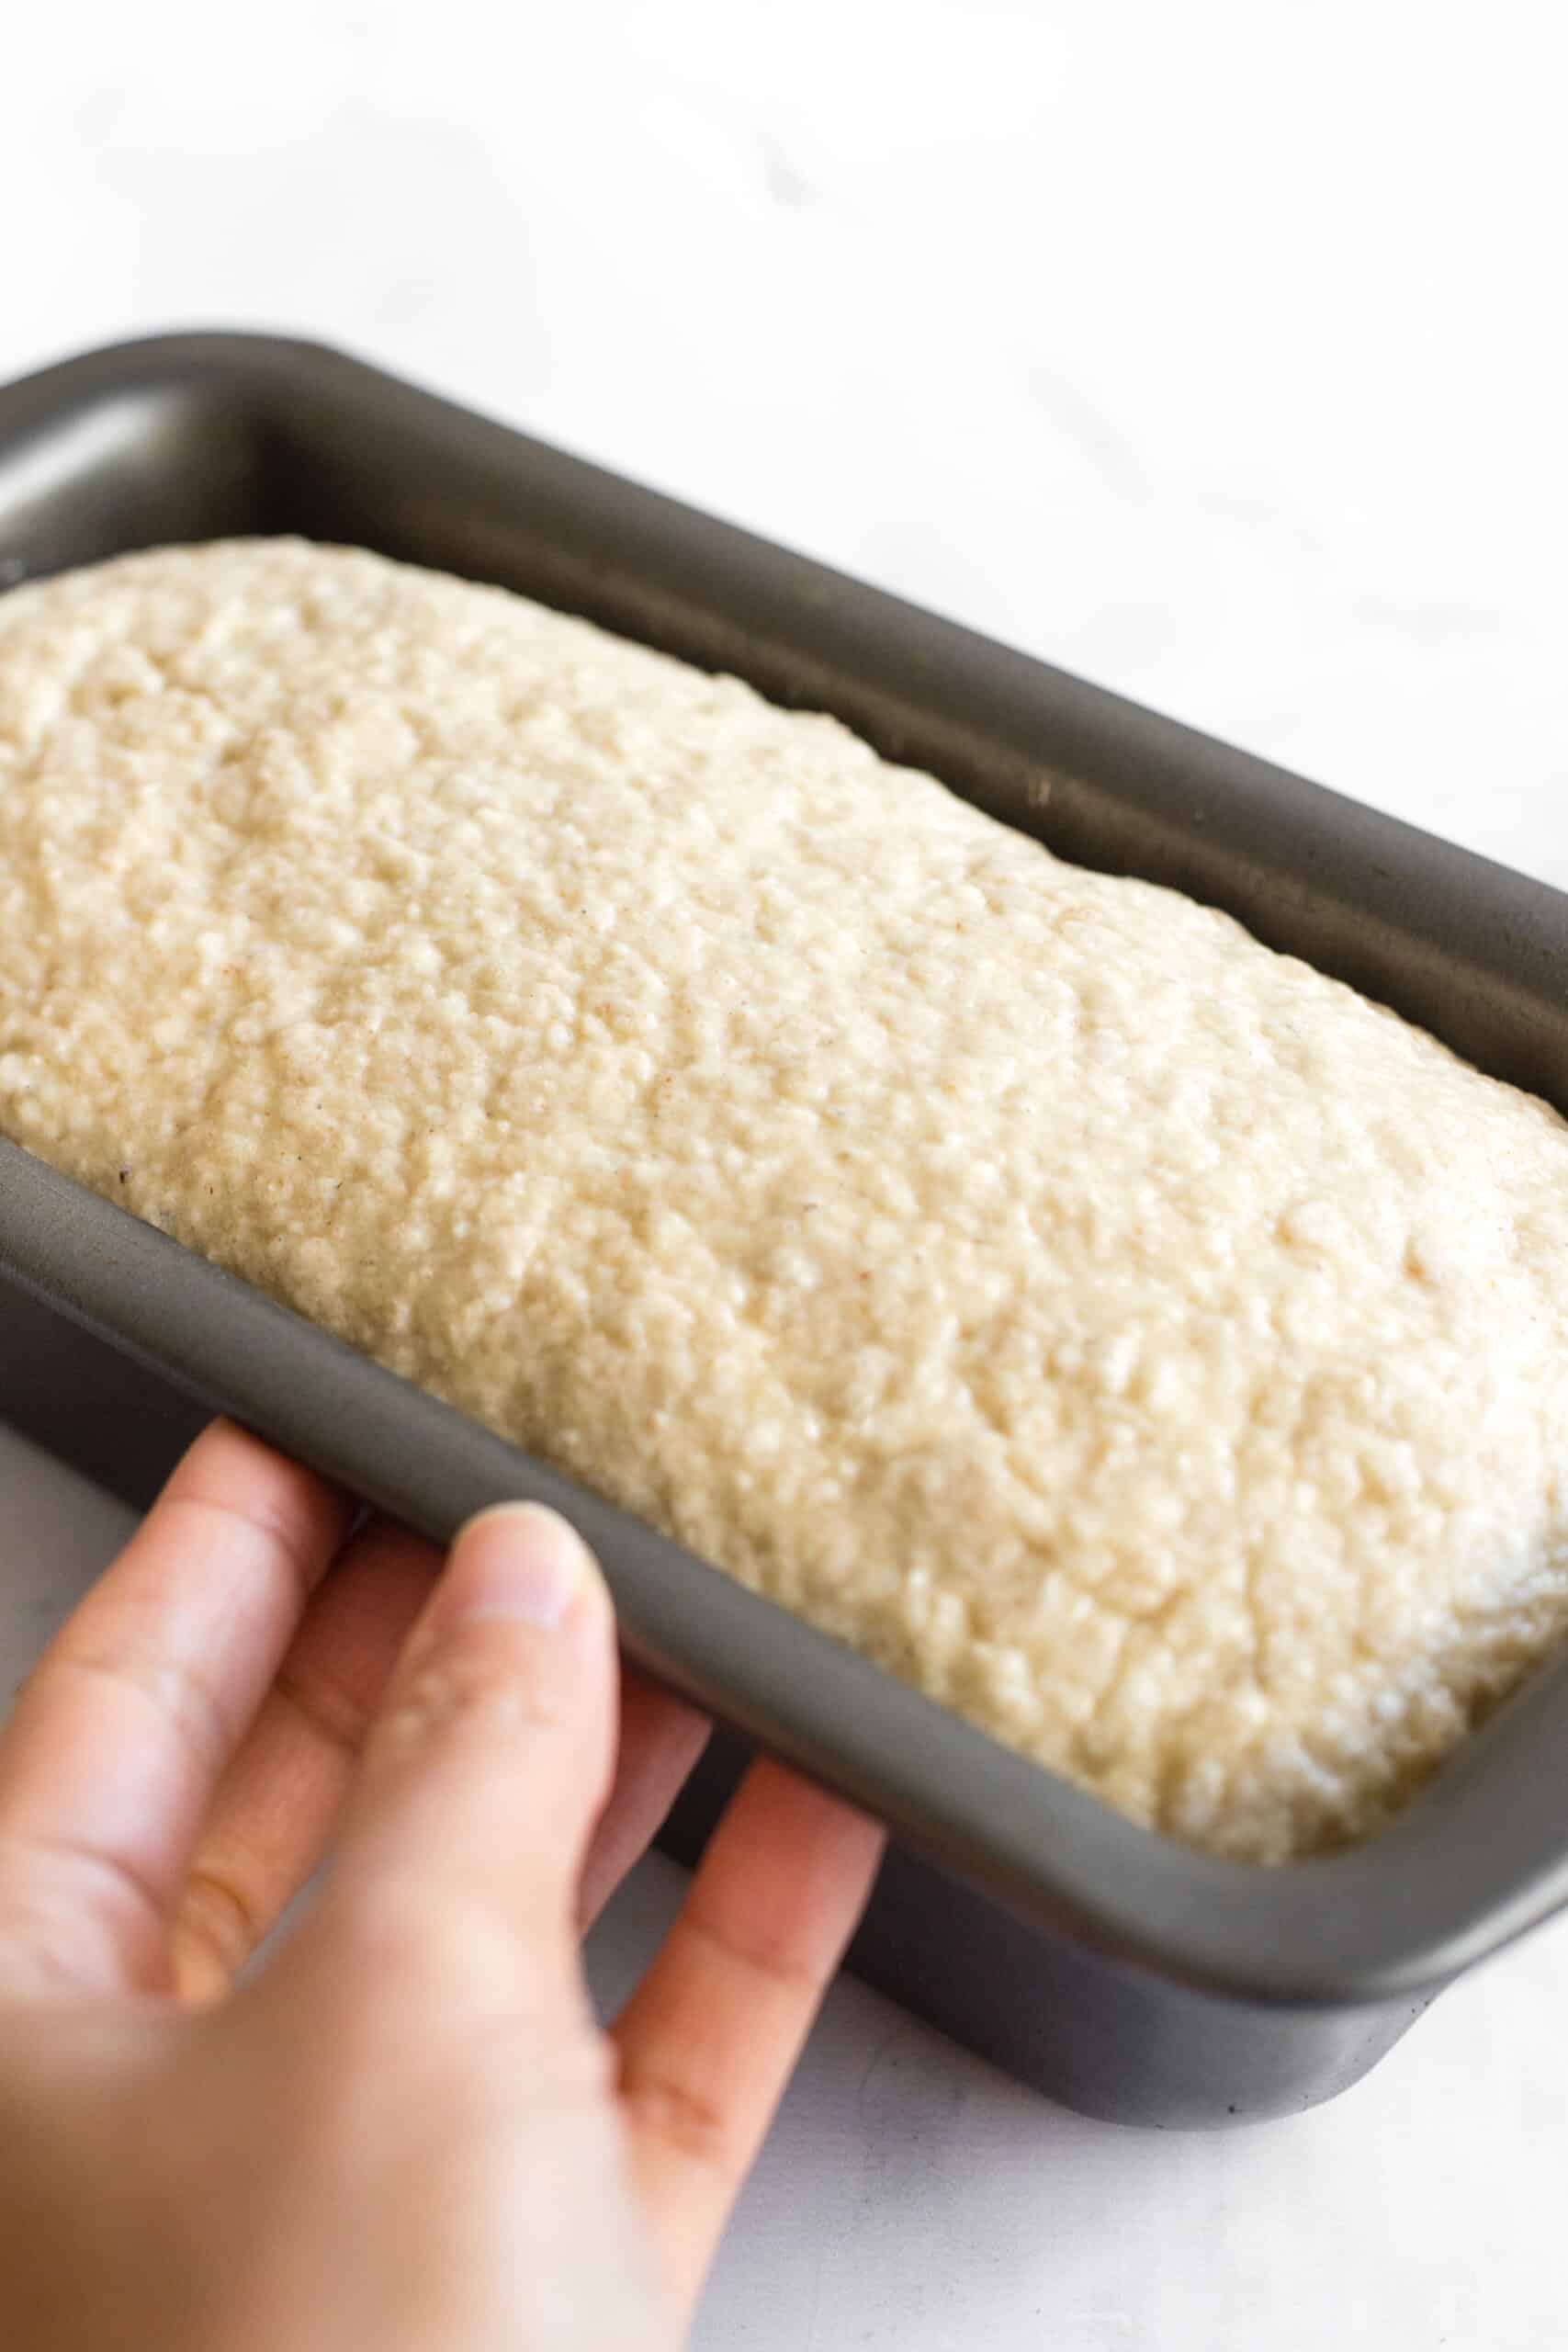 Holding a loaf pan with risen dough inside.